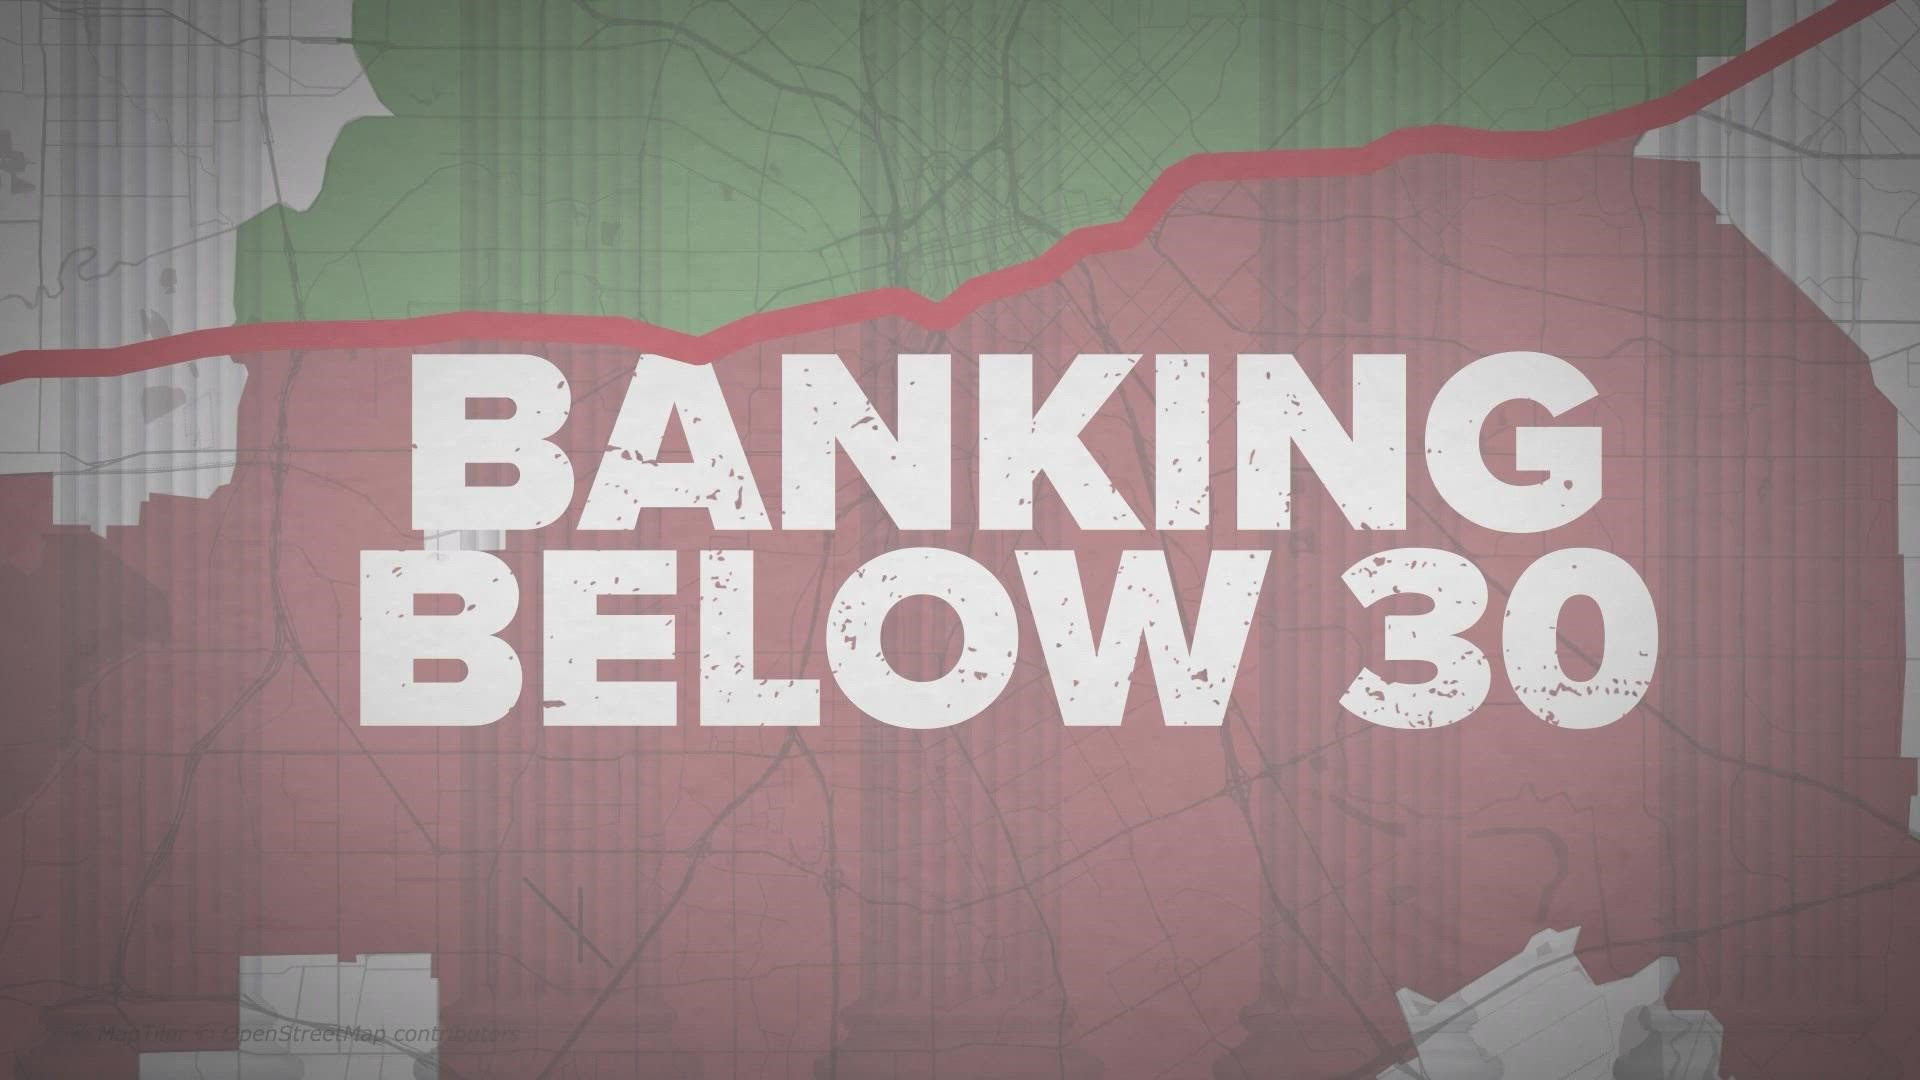 For more than a year, WFAA’s Banking Below 30 investigative series has shown how banks lend relatively little money in minority neighborhoods.